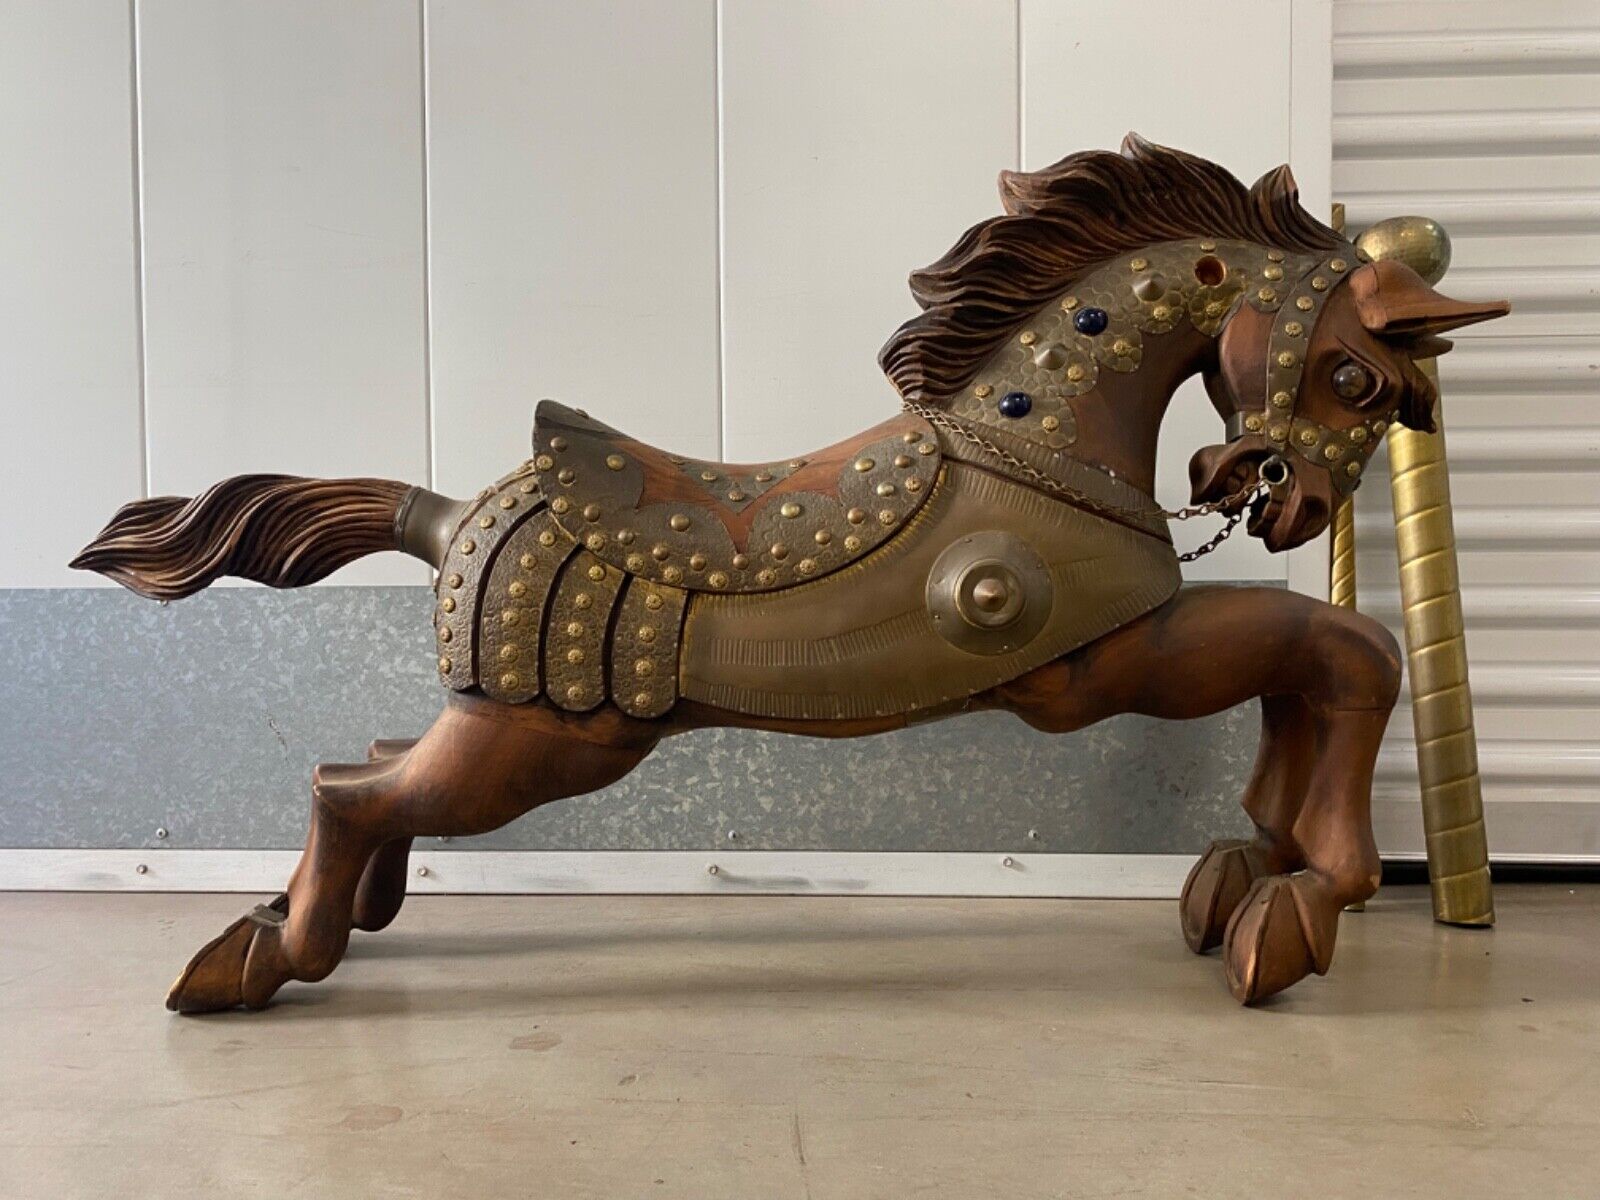 🔥 Fine Antique Old American Folk Art Wood Carved Carousel Horse - WOW